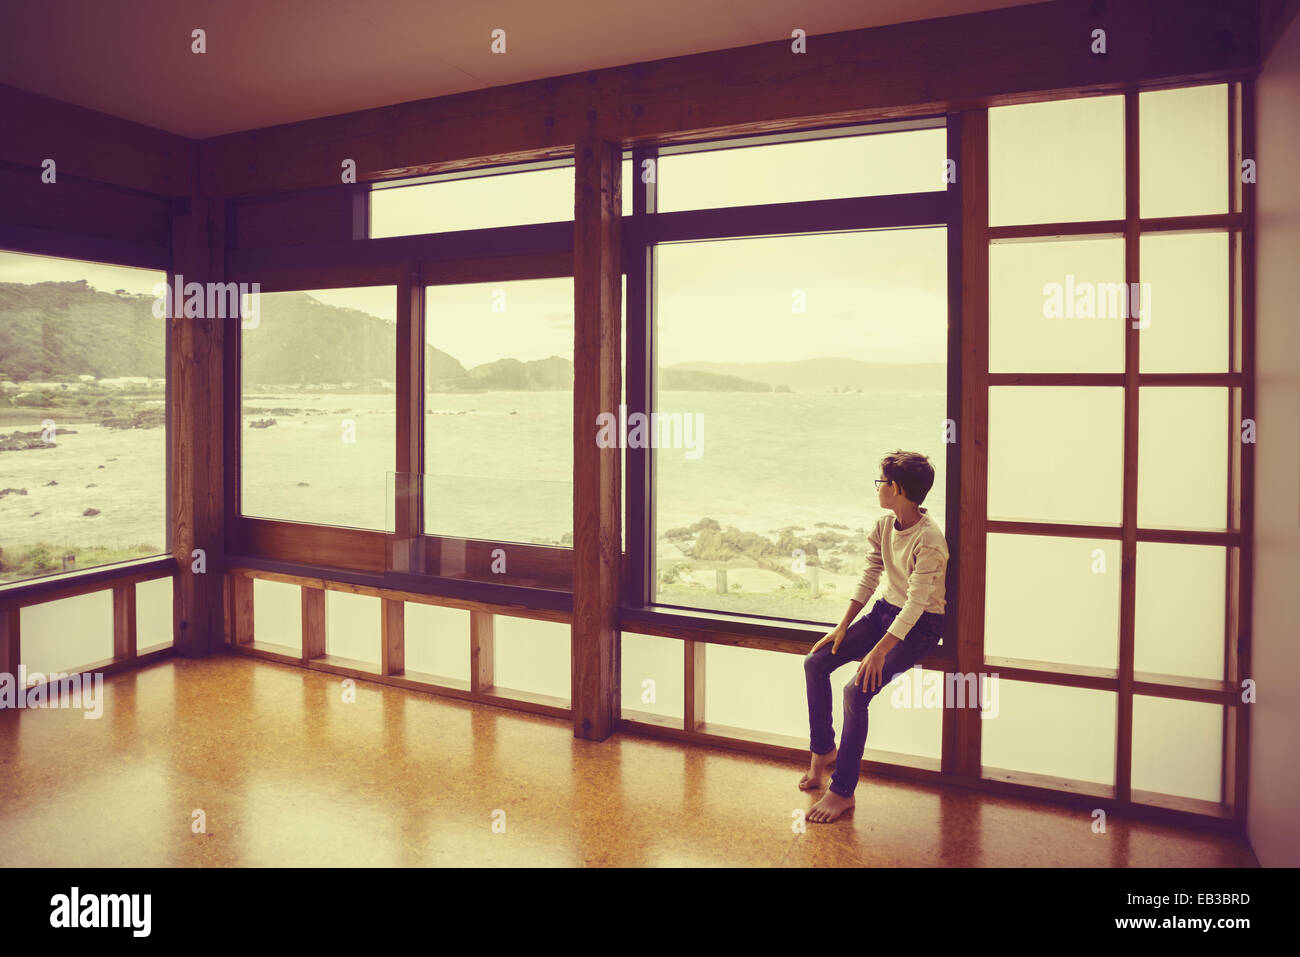 Mixed race boy looking out window Stock Photo